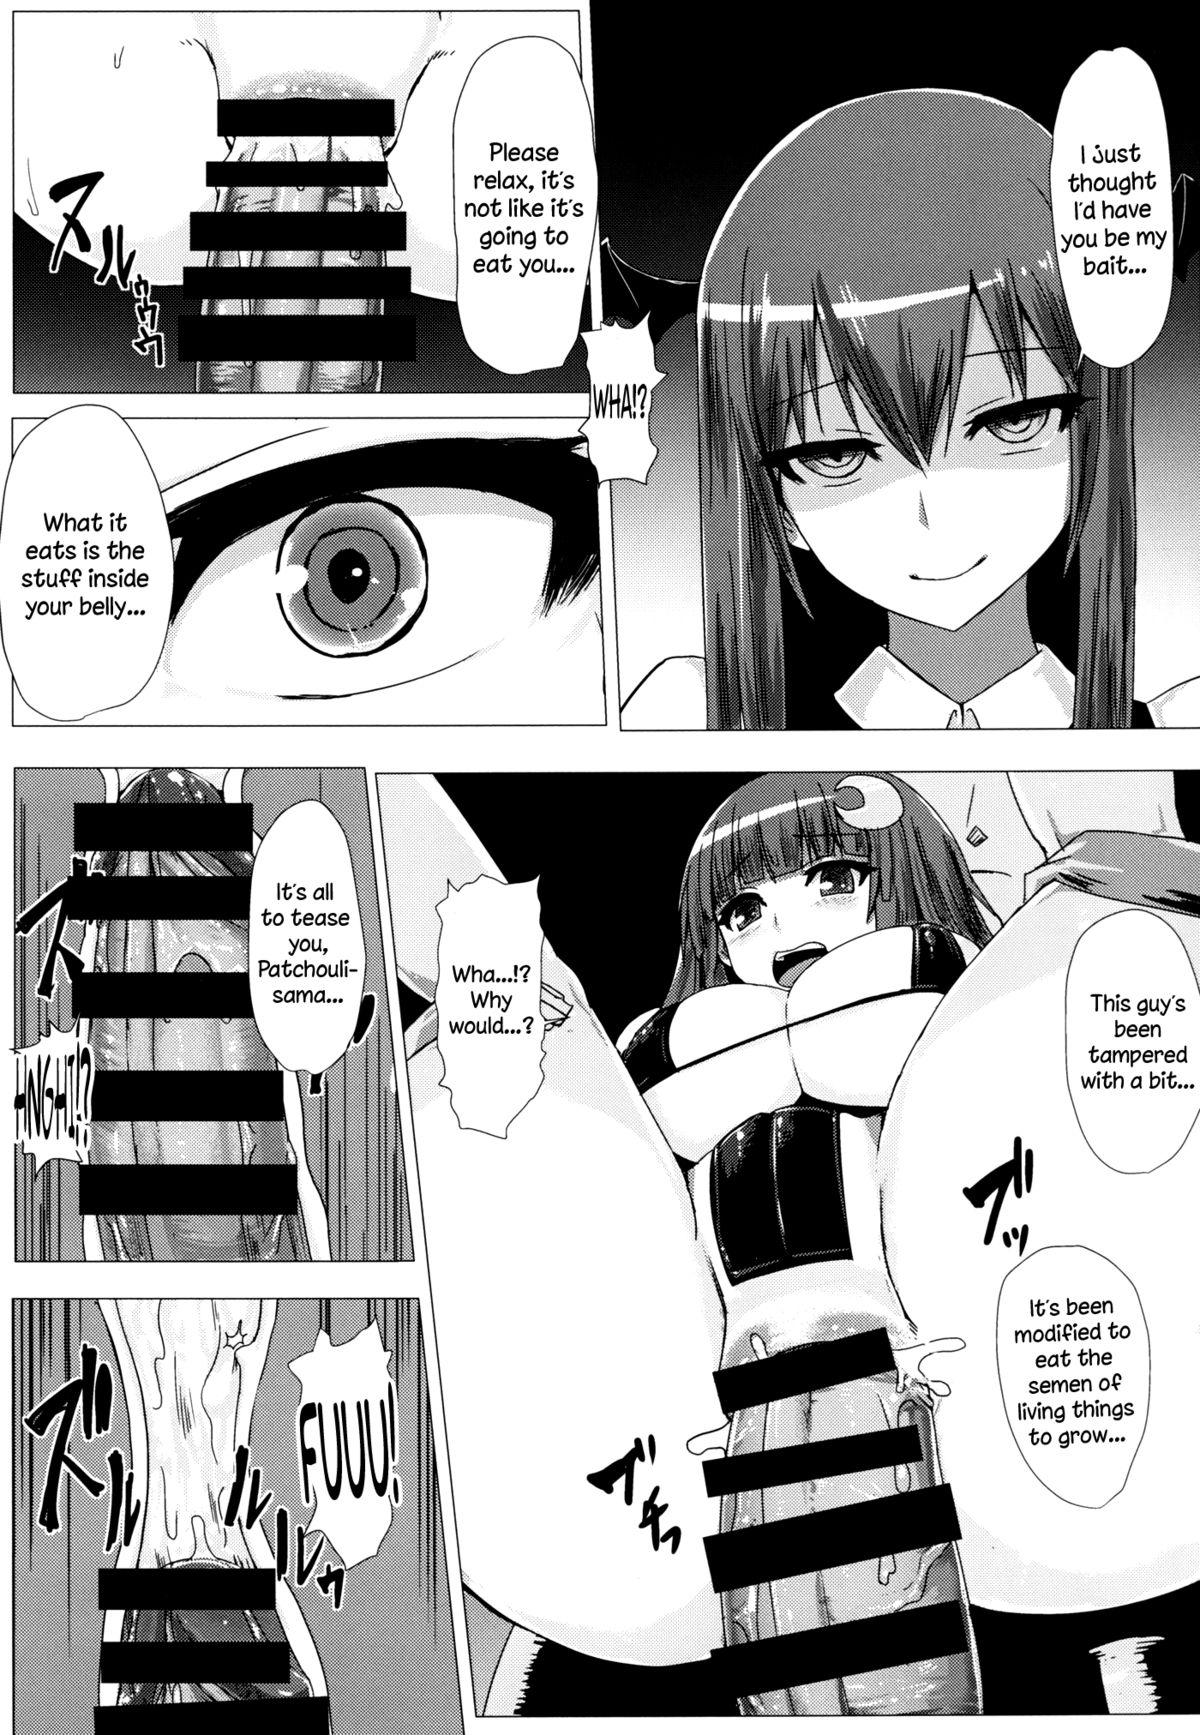 Slim Shiri Pache Pache | Ass Patchy Patchy - Touhou project Olderwoman - Page 10